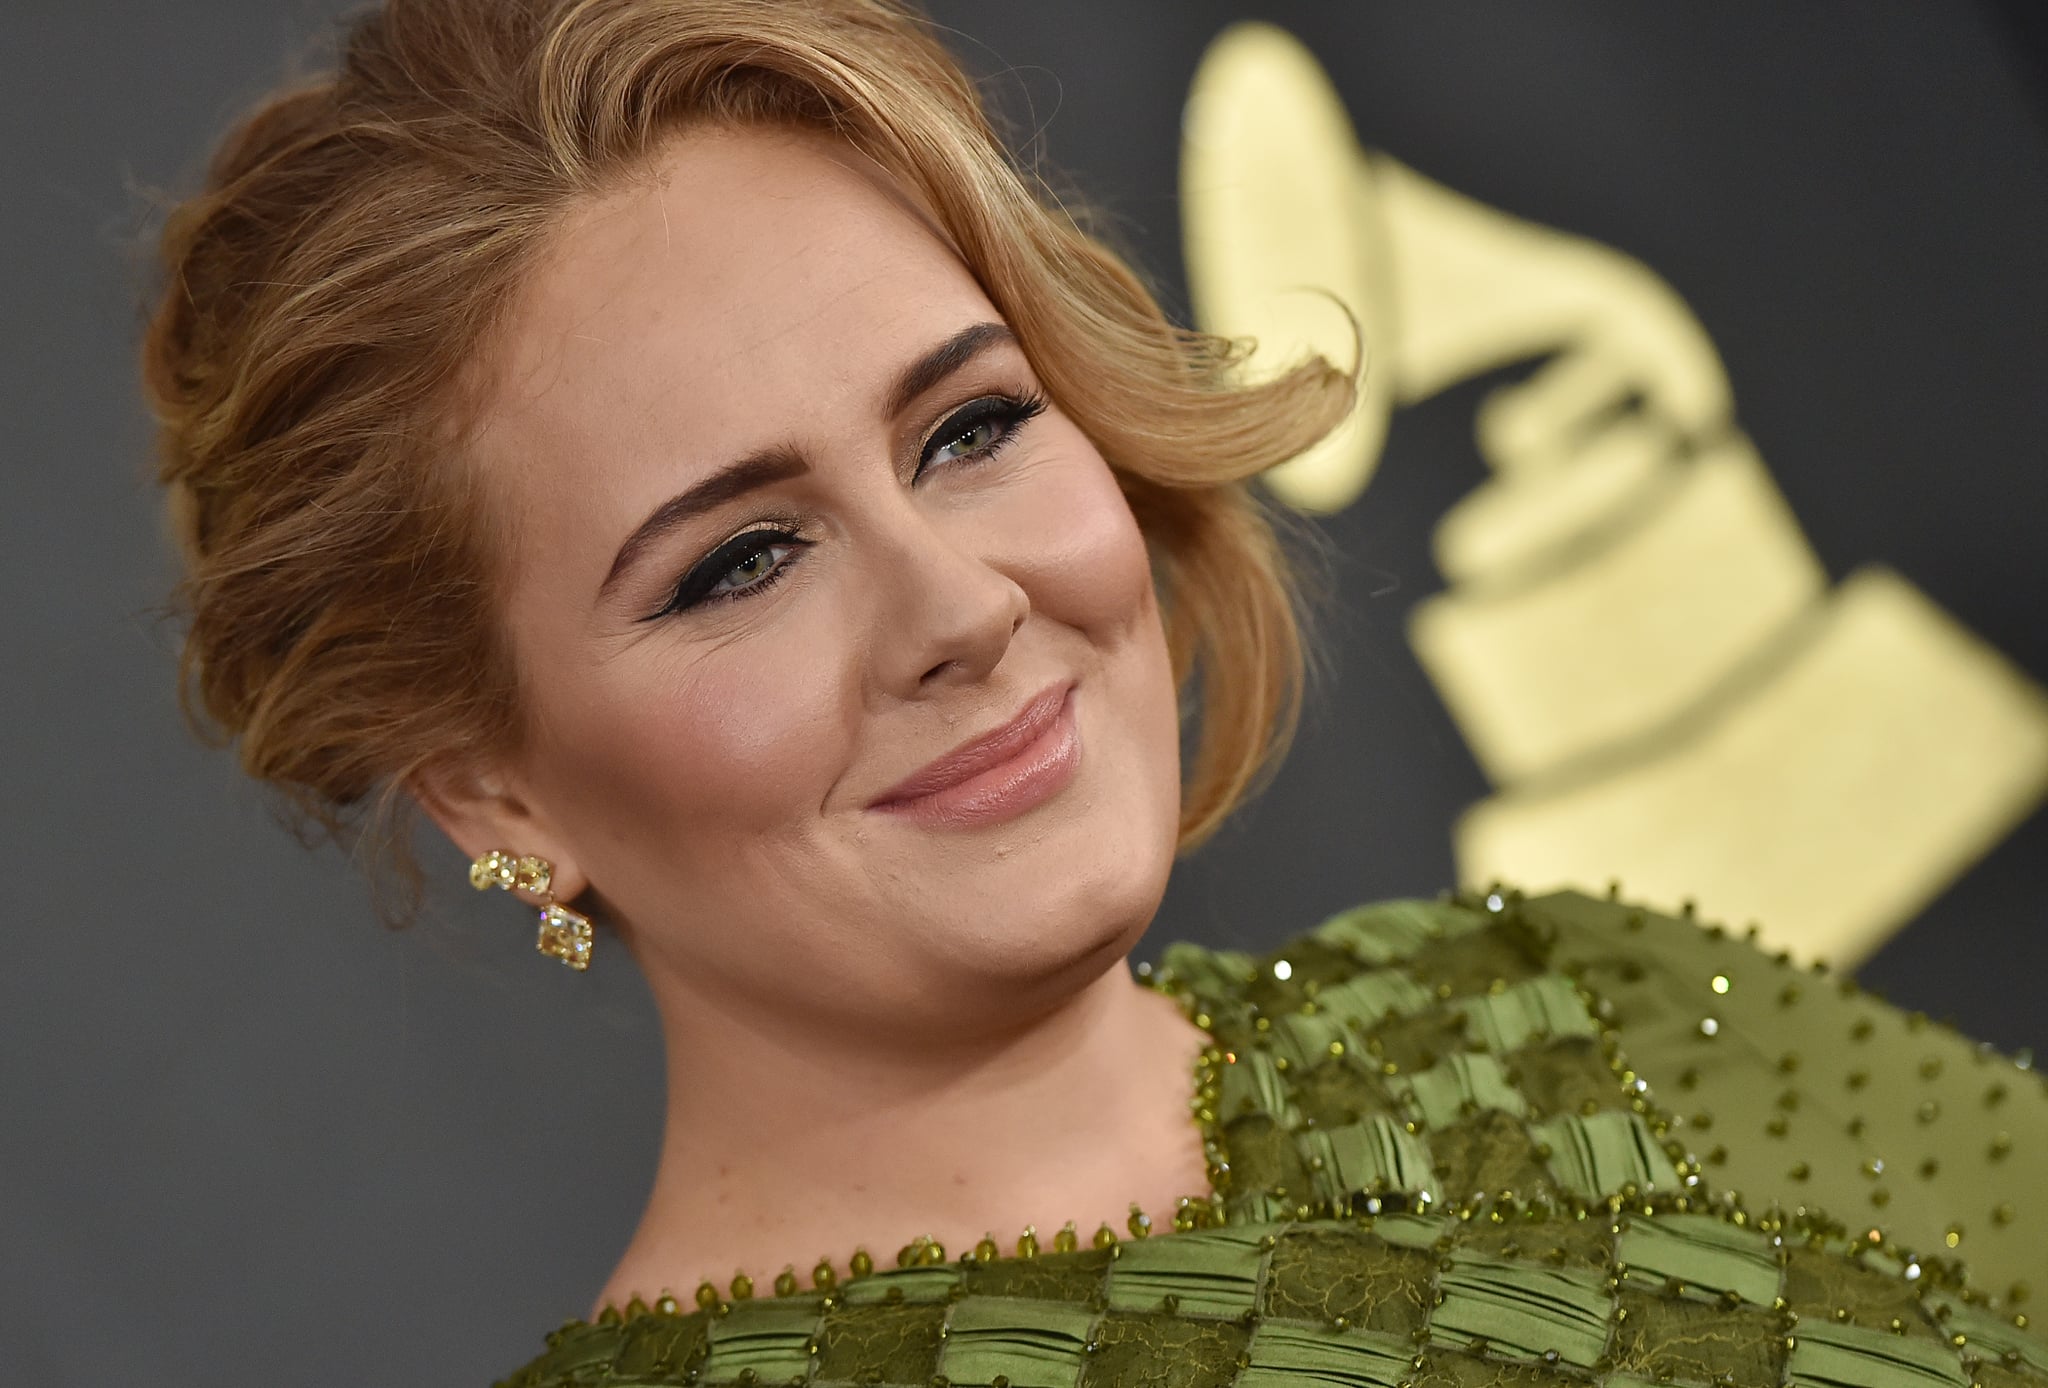 LOS ANGELES, CA - FEBRUARY 12:  Recording artist Adele attends the 59th GRAMMY Awards at STAPLES Center on February 12, 2017 in Los Angeles, California.  (Photo by Axelle/Bauer-Griffin/FilmMagic)